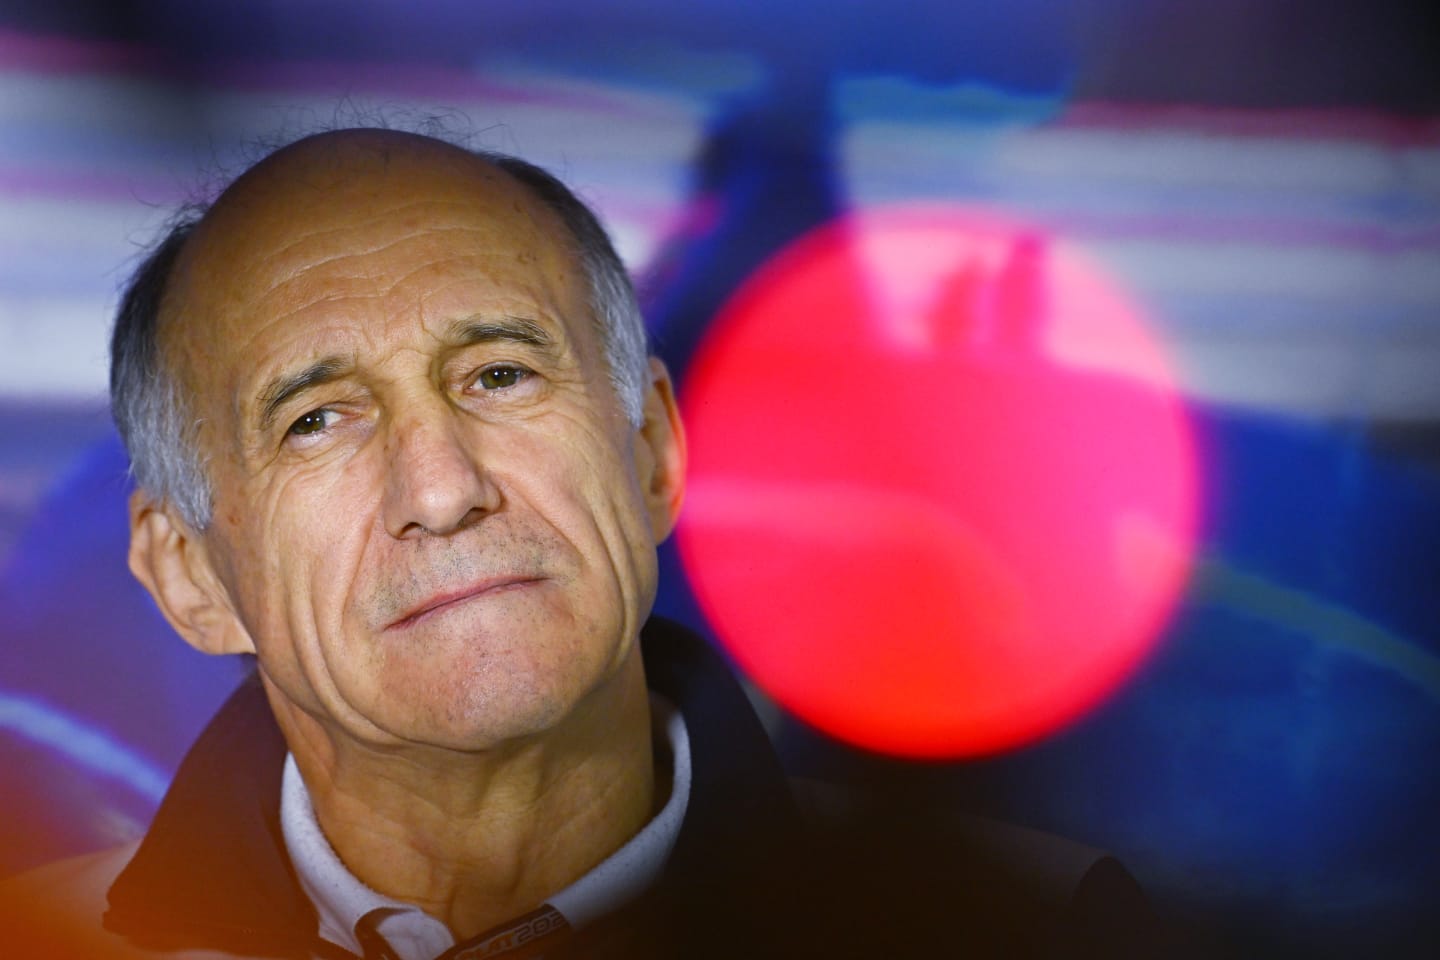 ZANDVOORT, NETHERLANDS - SEPTEMBER 03: Scuderia AlphaTauri Team Principal Franz Tost attends the Team Principals Press Conference prior to final practice ahead of the F1 Grand Prix of The Netherlands at Circuit Zandvoort on September 03, 2022 in Zandvoort, Netherlands. (Photo by Clive Mason/Getty Images)